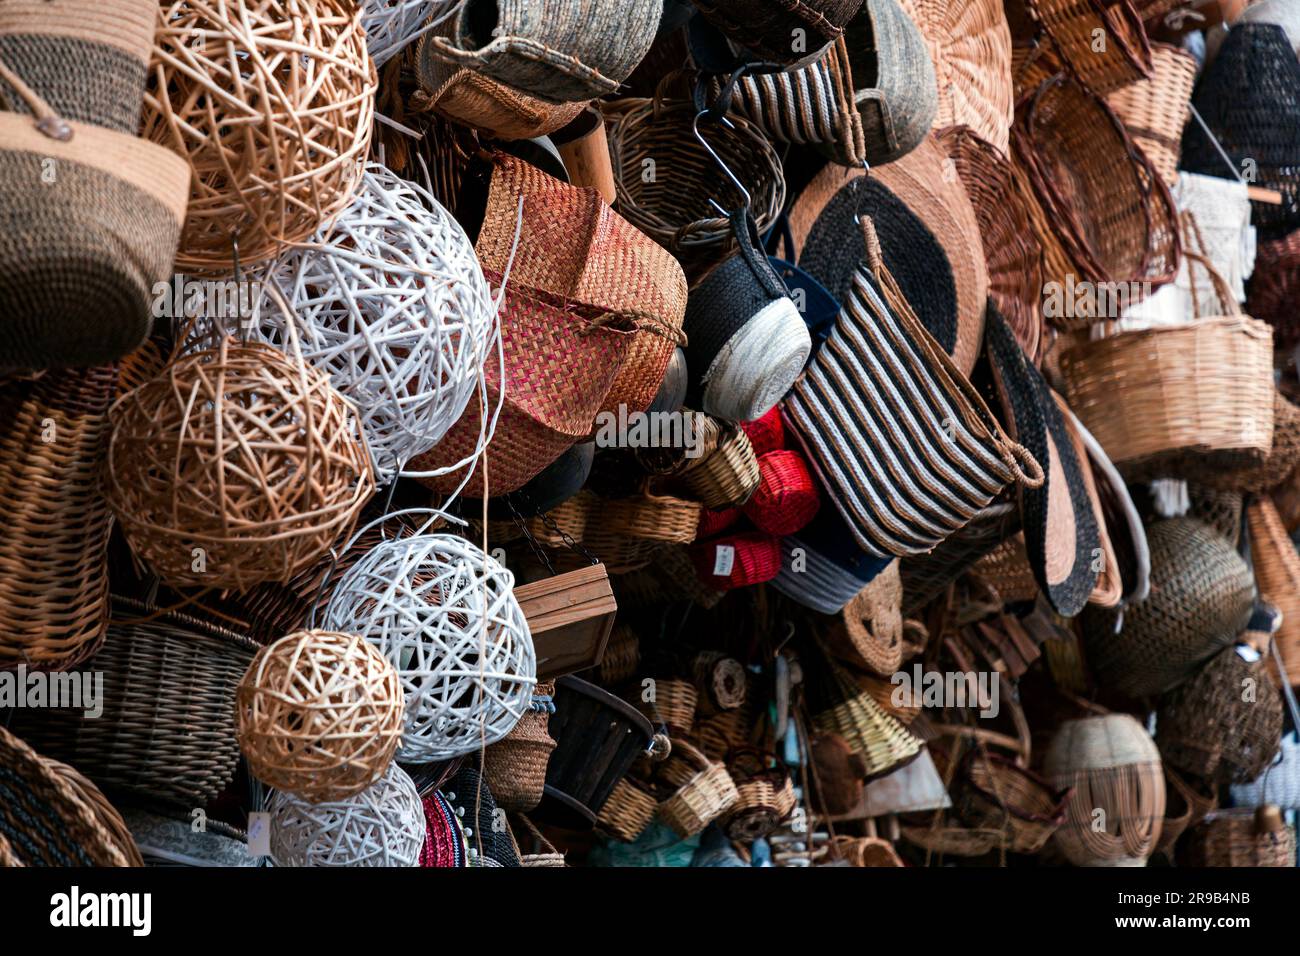 Athens, Greece - 25 Nov 2021: Traditional handmade baskets and household items sold at a basket shop in Athens, Greece. Stock Photo